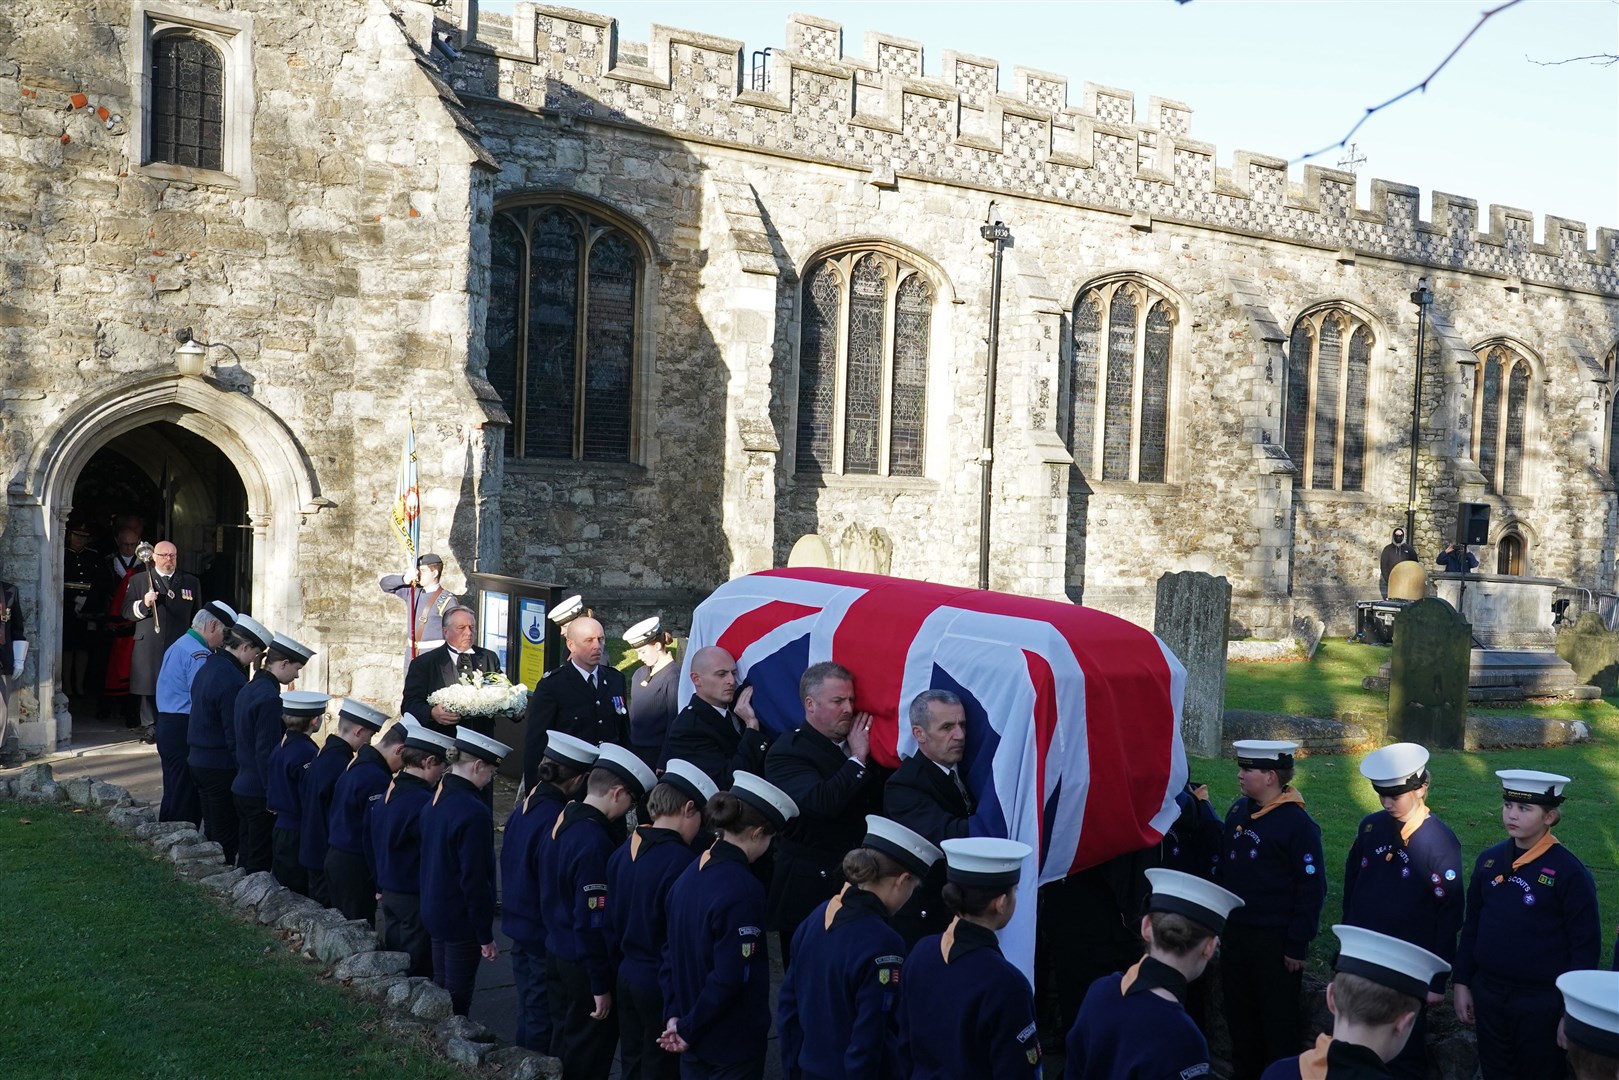 Pall bearers carry the coffin of Sir David Amess out of St Mary’s Church in Prittlewell, Southend, following his funeral service (Gareth Fuller/PA)